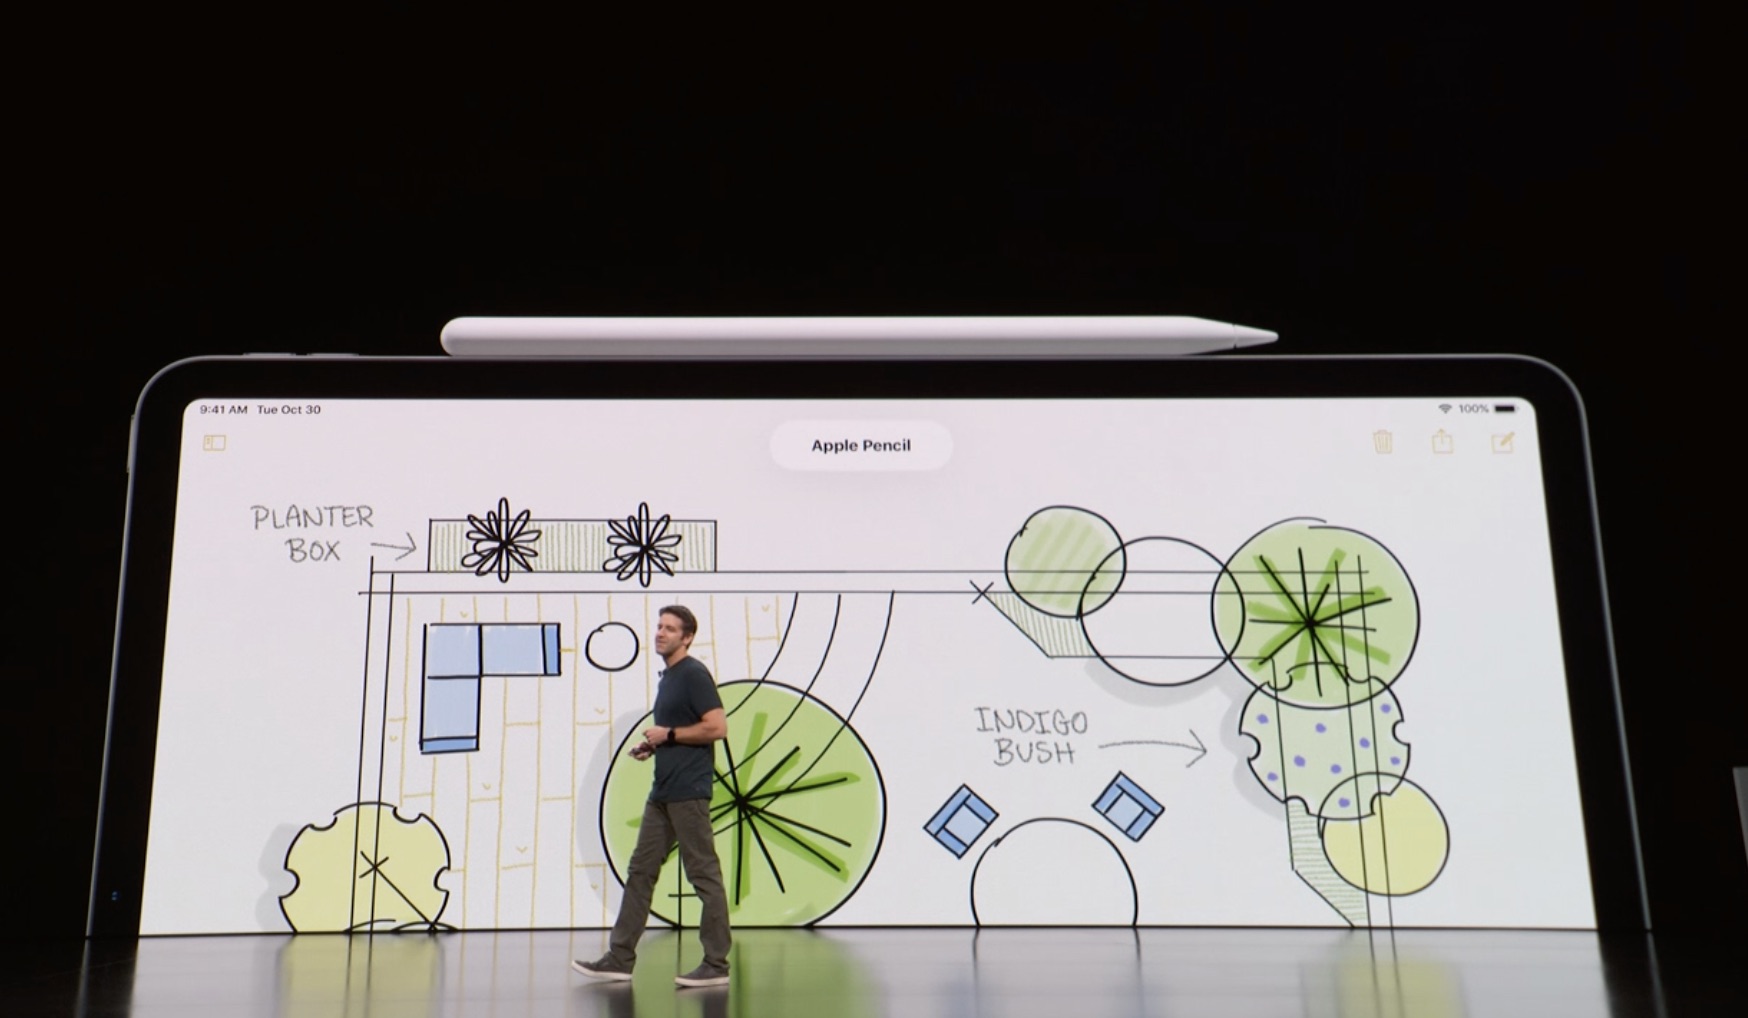 Apple Pencil 2 Is Here With Gesture Control And Wireless Charging